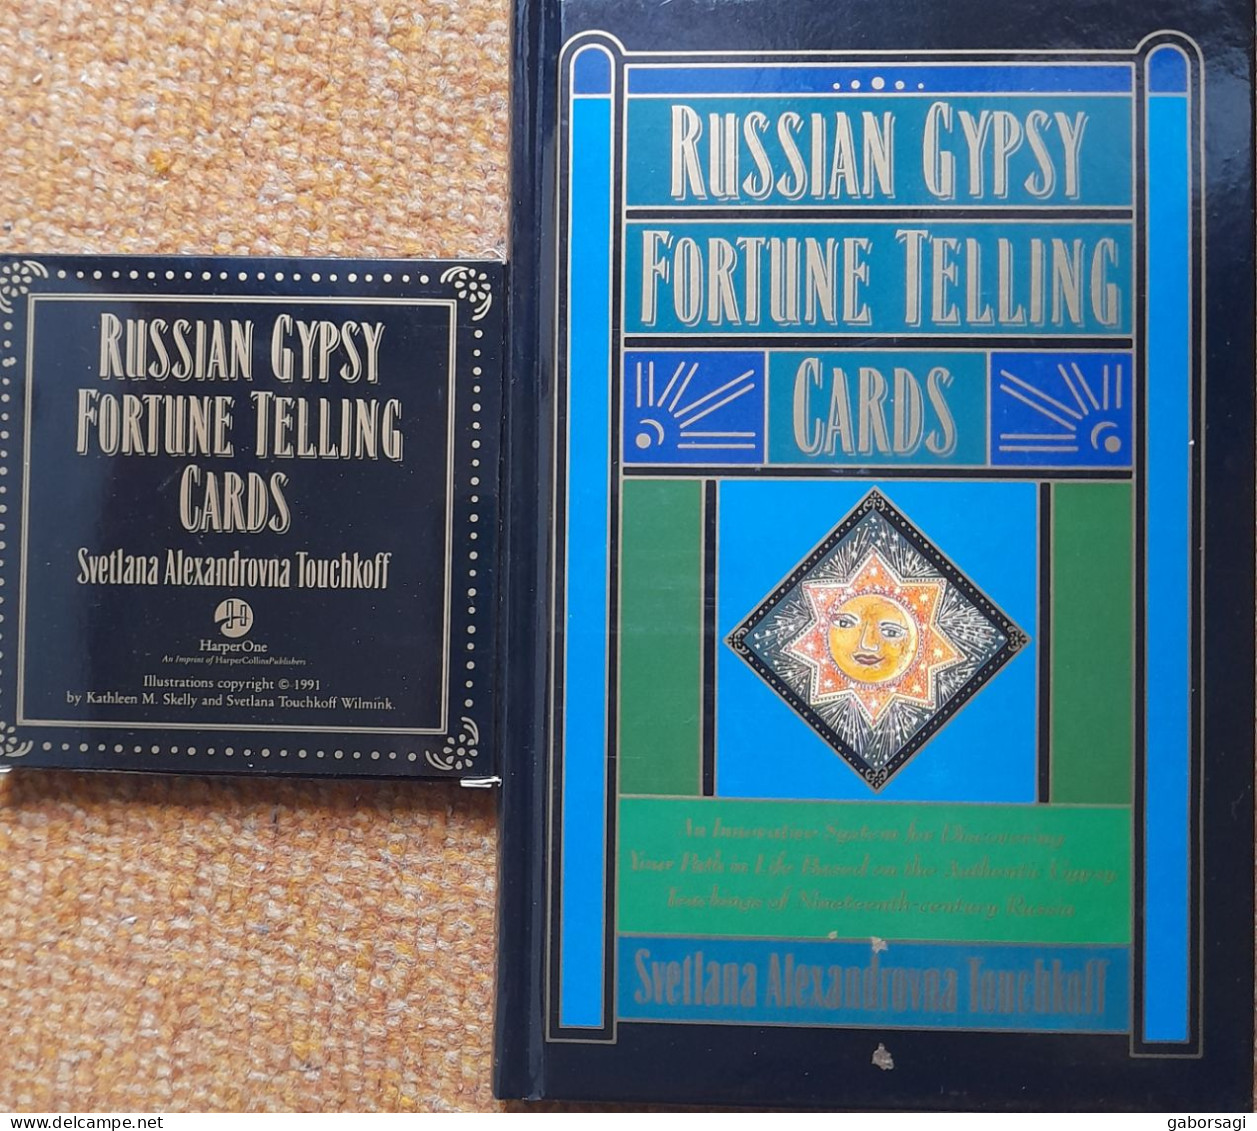 Russian Gypsy Fortune Telling Card - Svetlana Alexandrovna Touchkoff - Livres Sur Les Collections